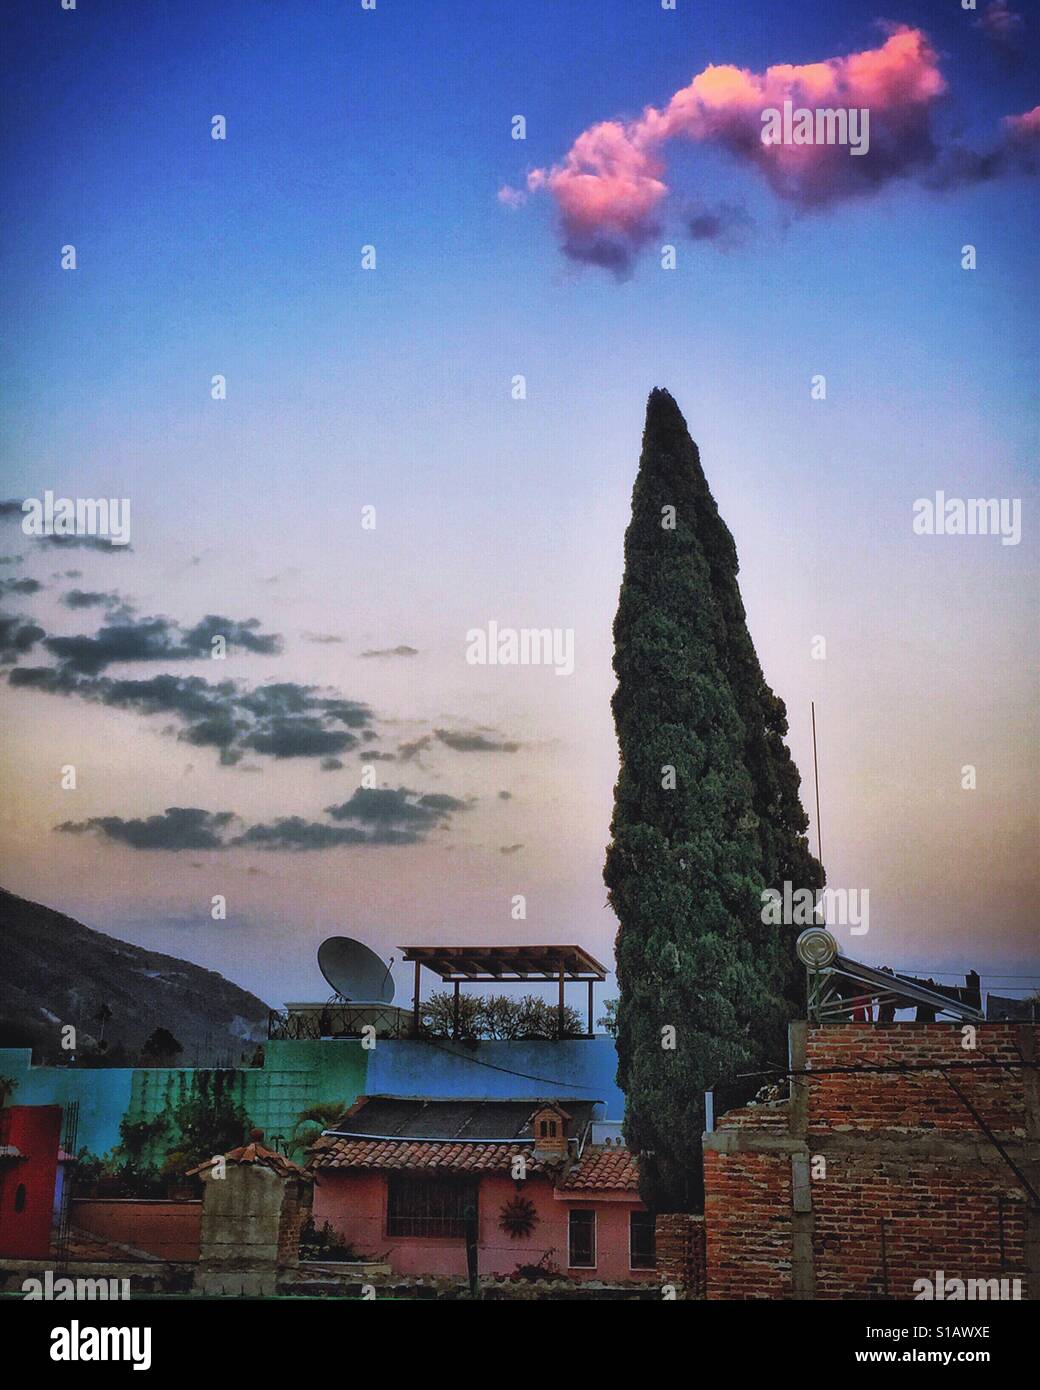 A tree points to a pink cloud in the sky over Ajijic, Mexico. Stock Photo